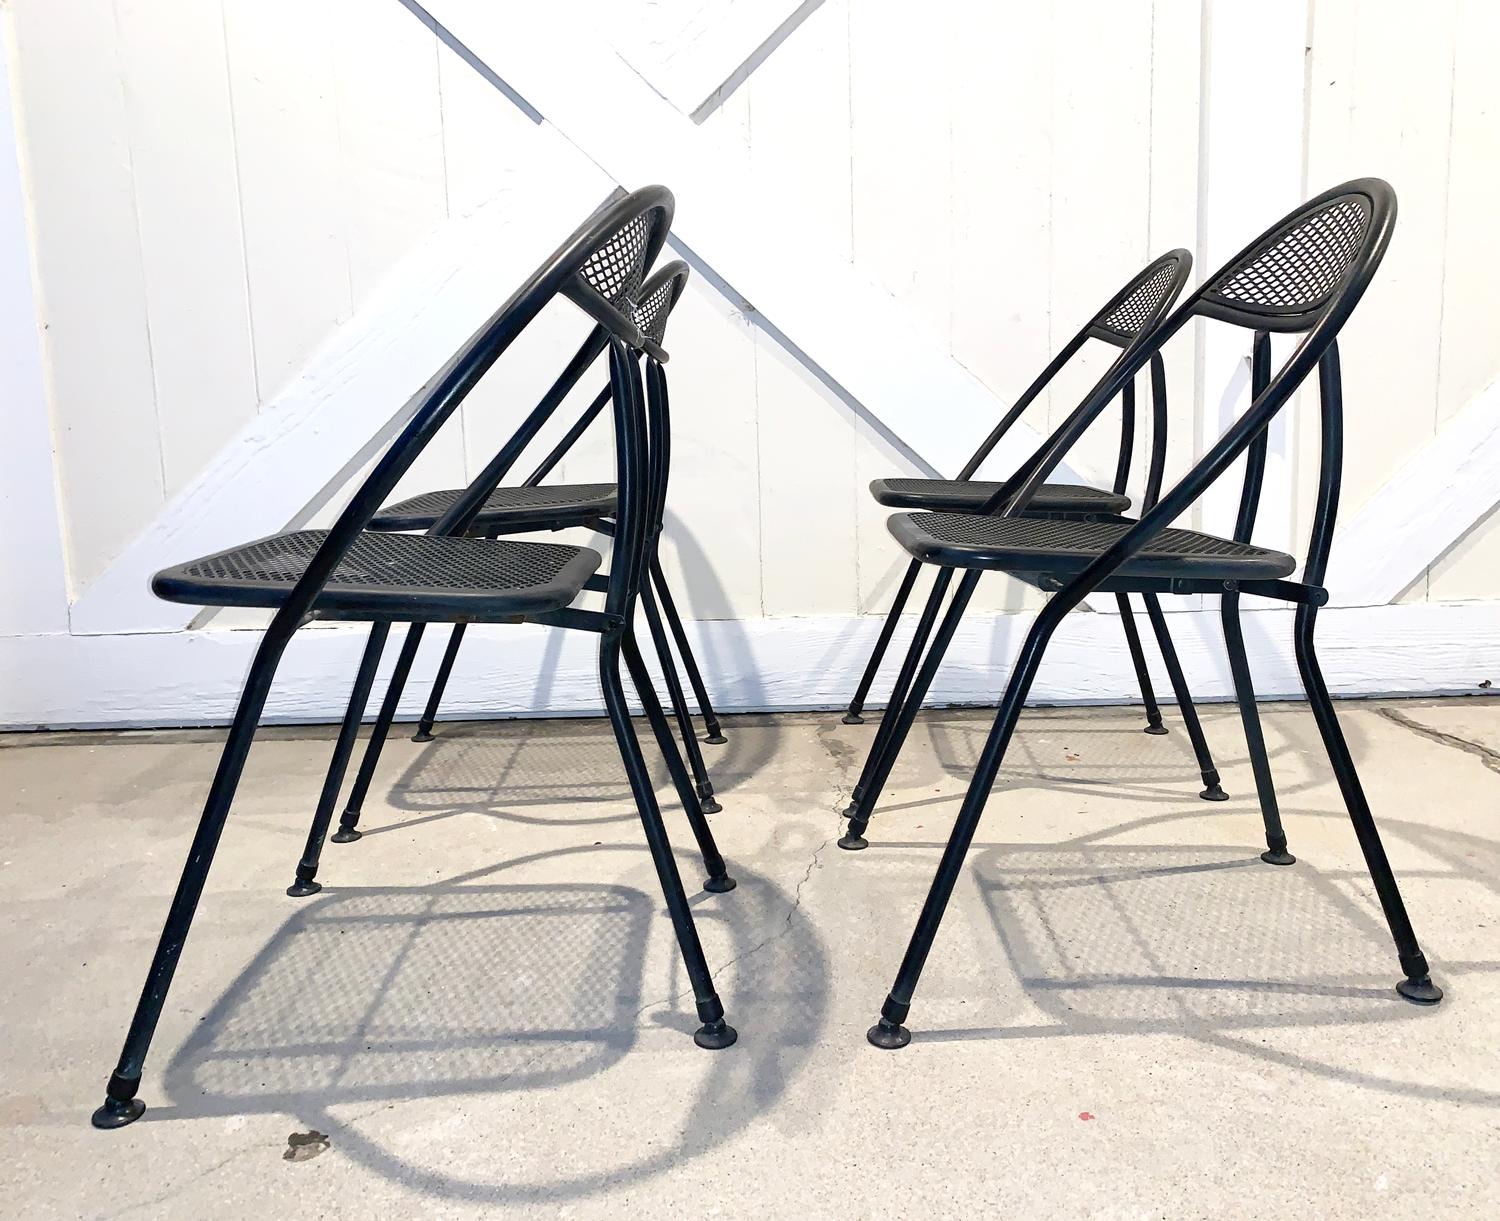 20th Century Set of 4 Folding Chairs by Salterini for Rid-Jid